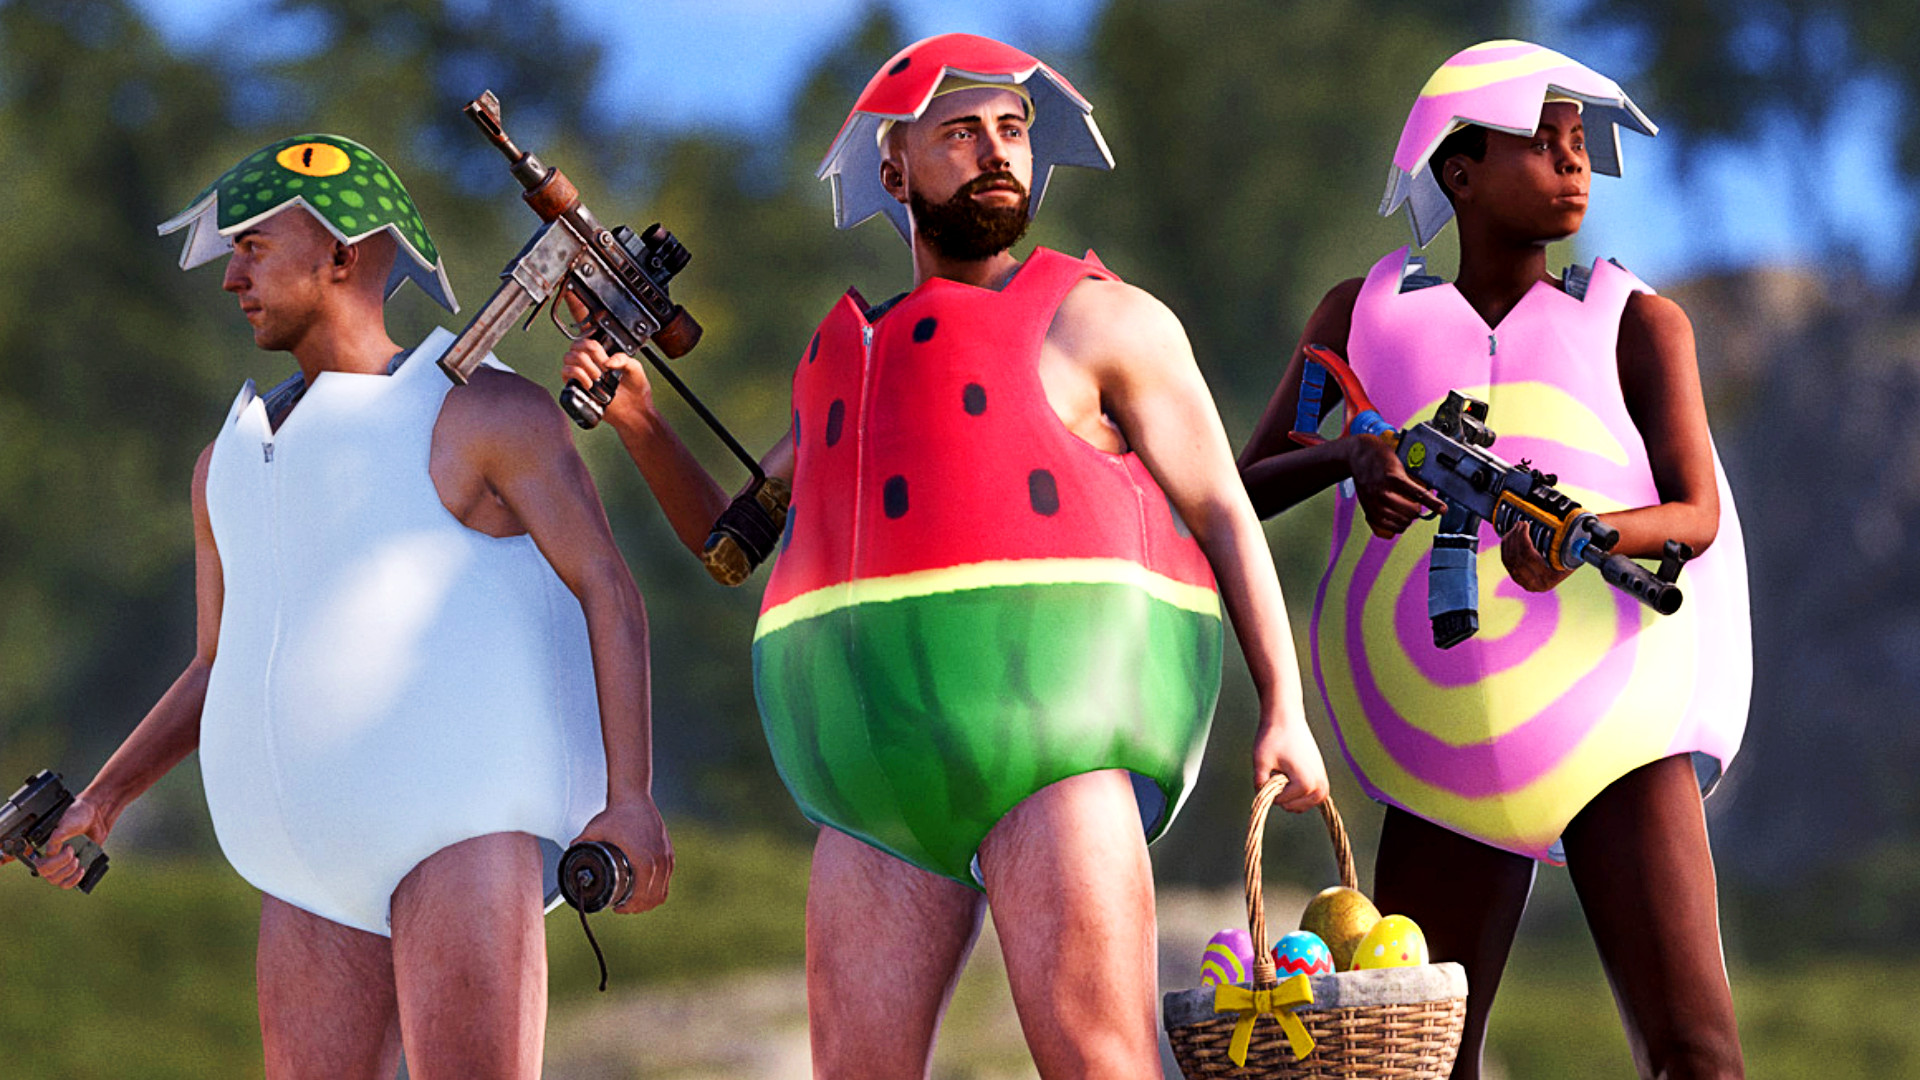 Rust update adds ping system, double saddles, and Easter eggs